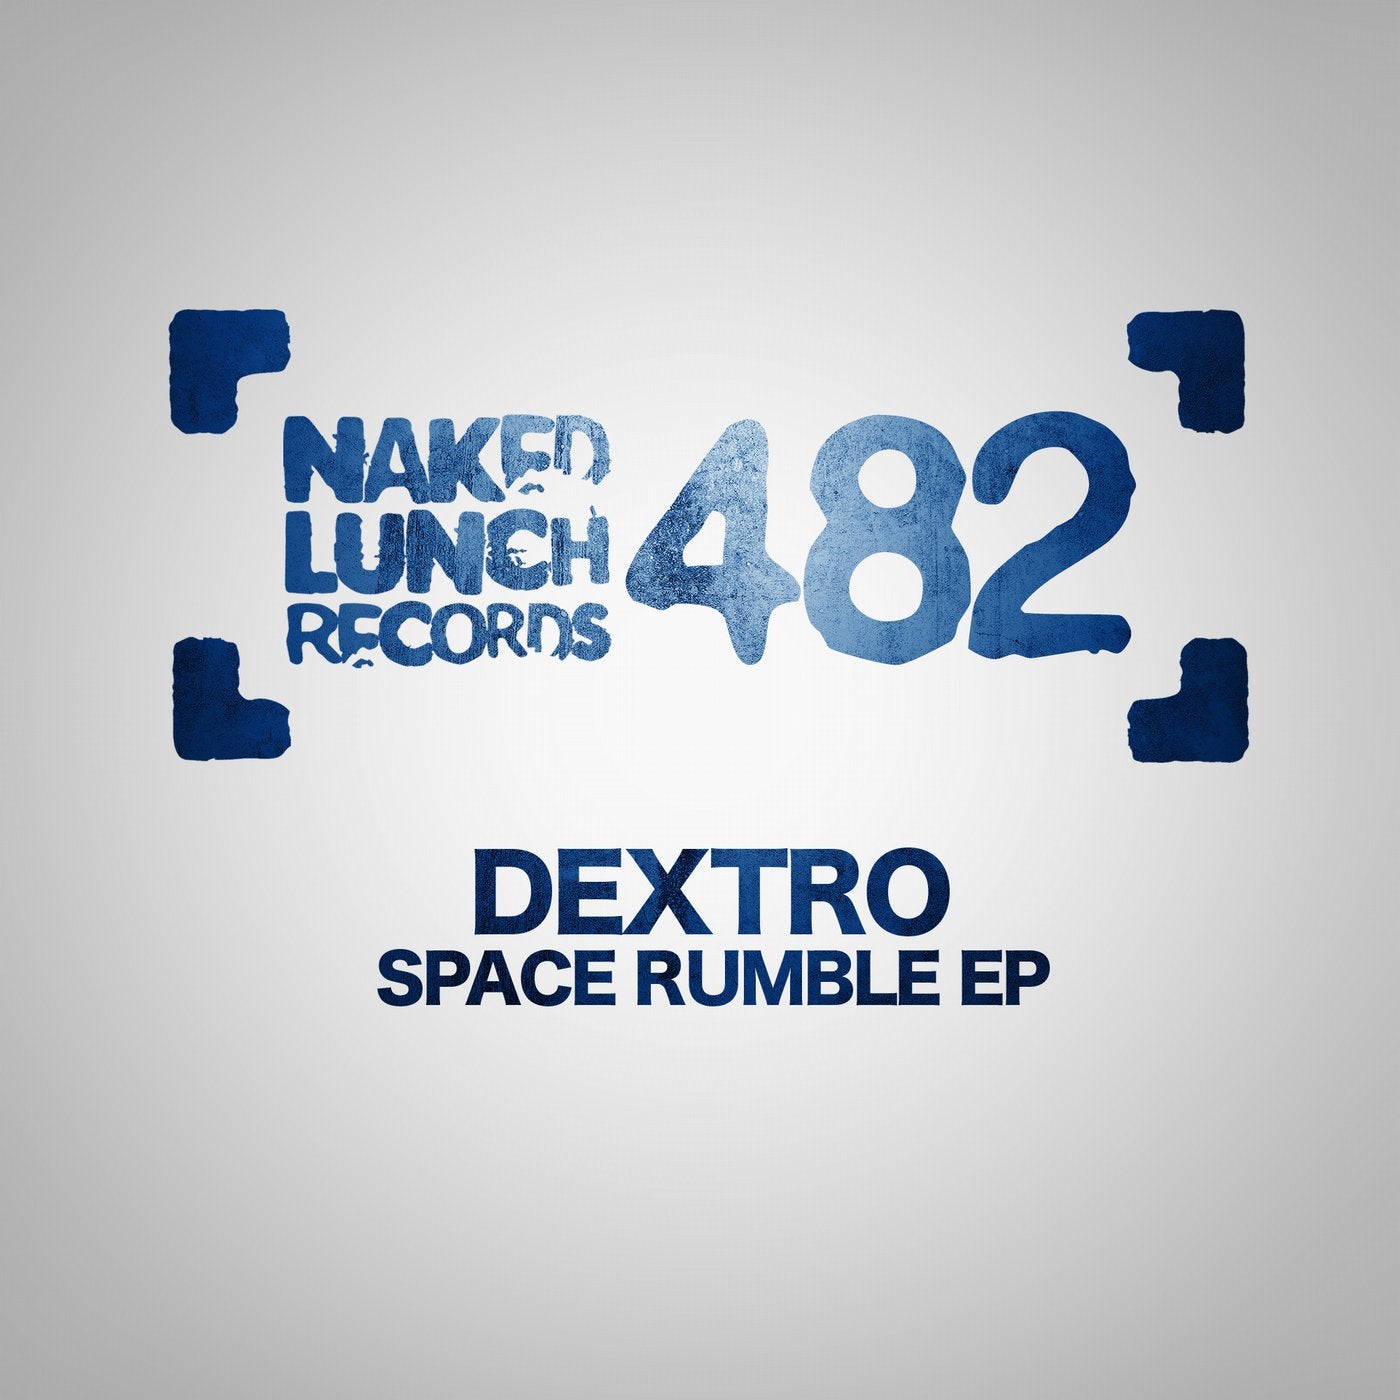 Space Rumble EP